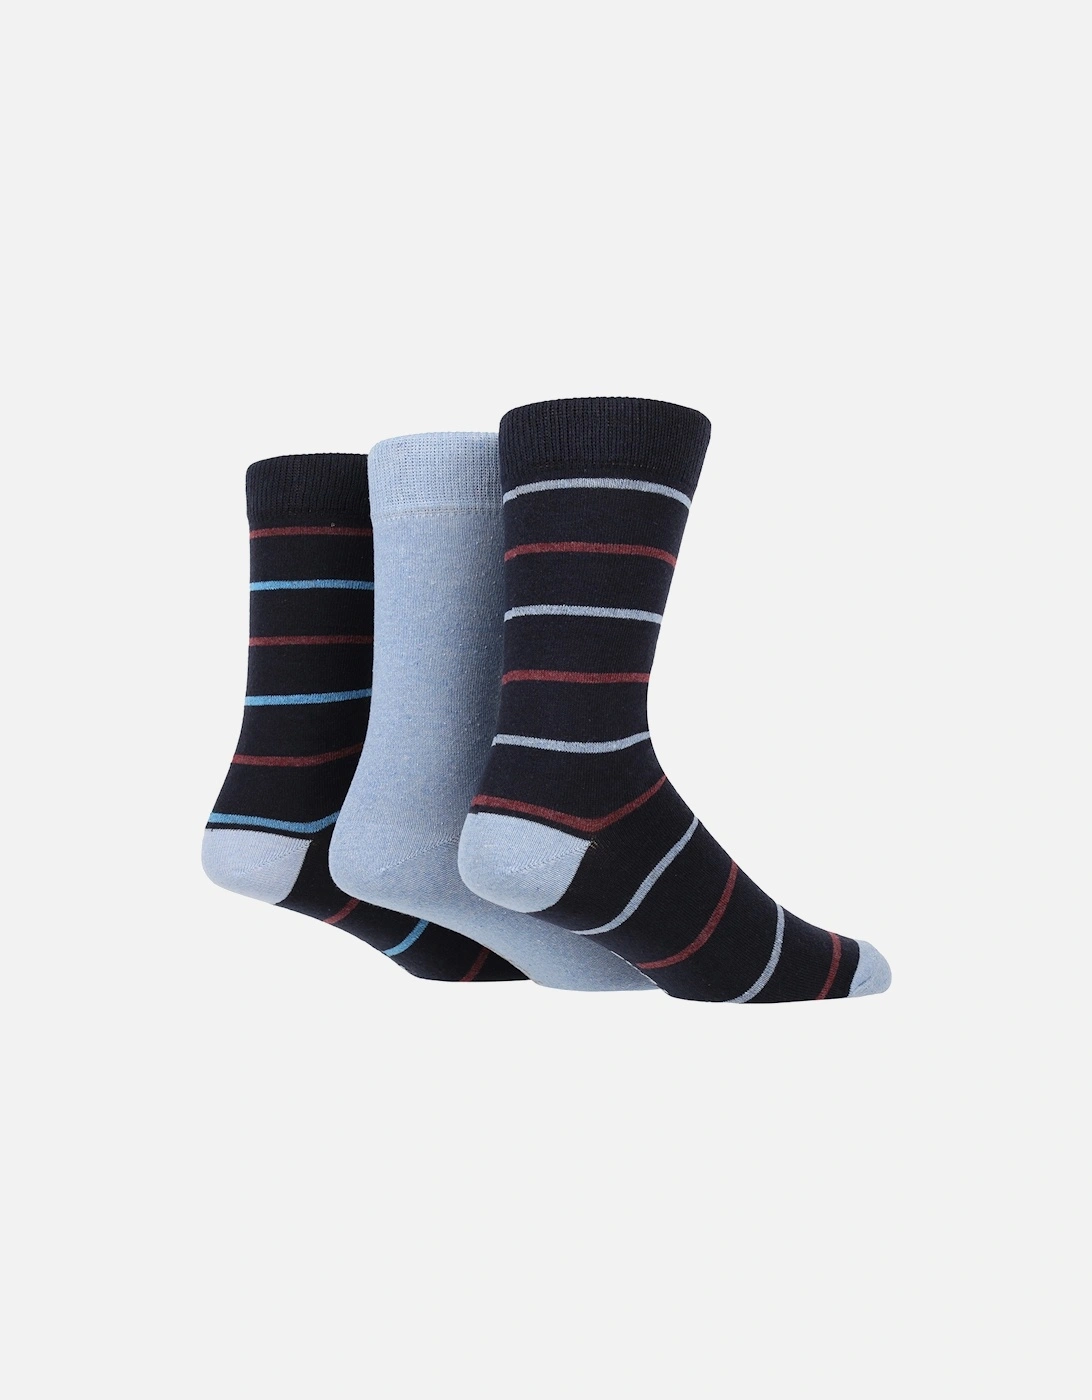 3 PAIR 100% RECYCLED MENS SOCKS WITH STRIPES, 2 of 1